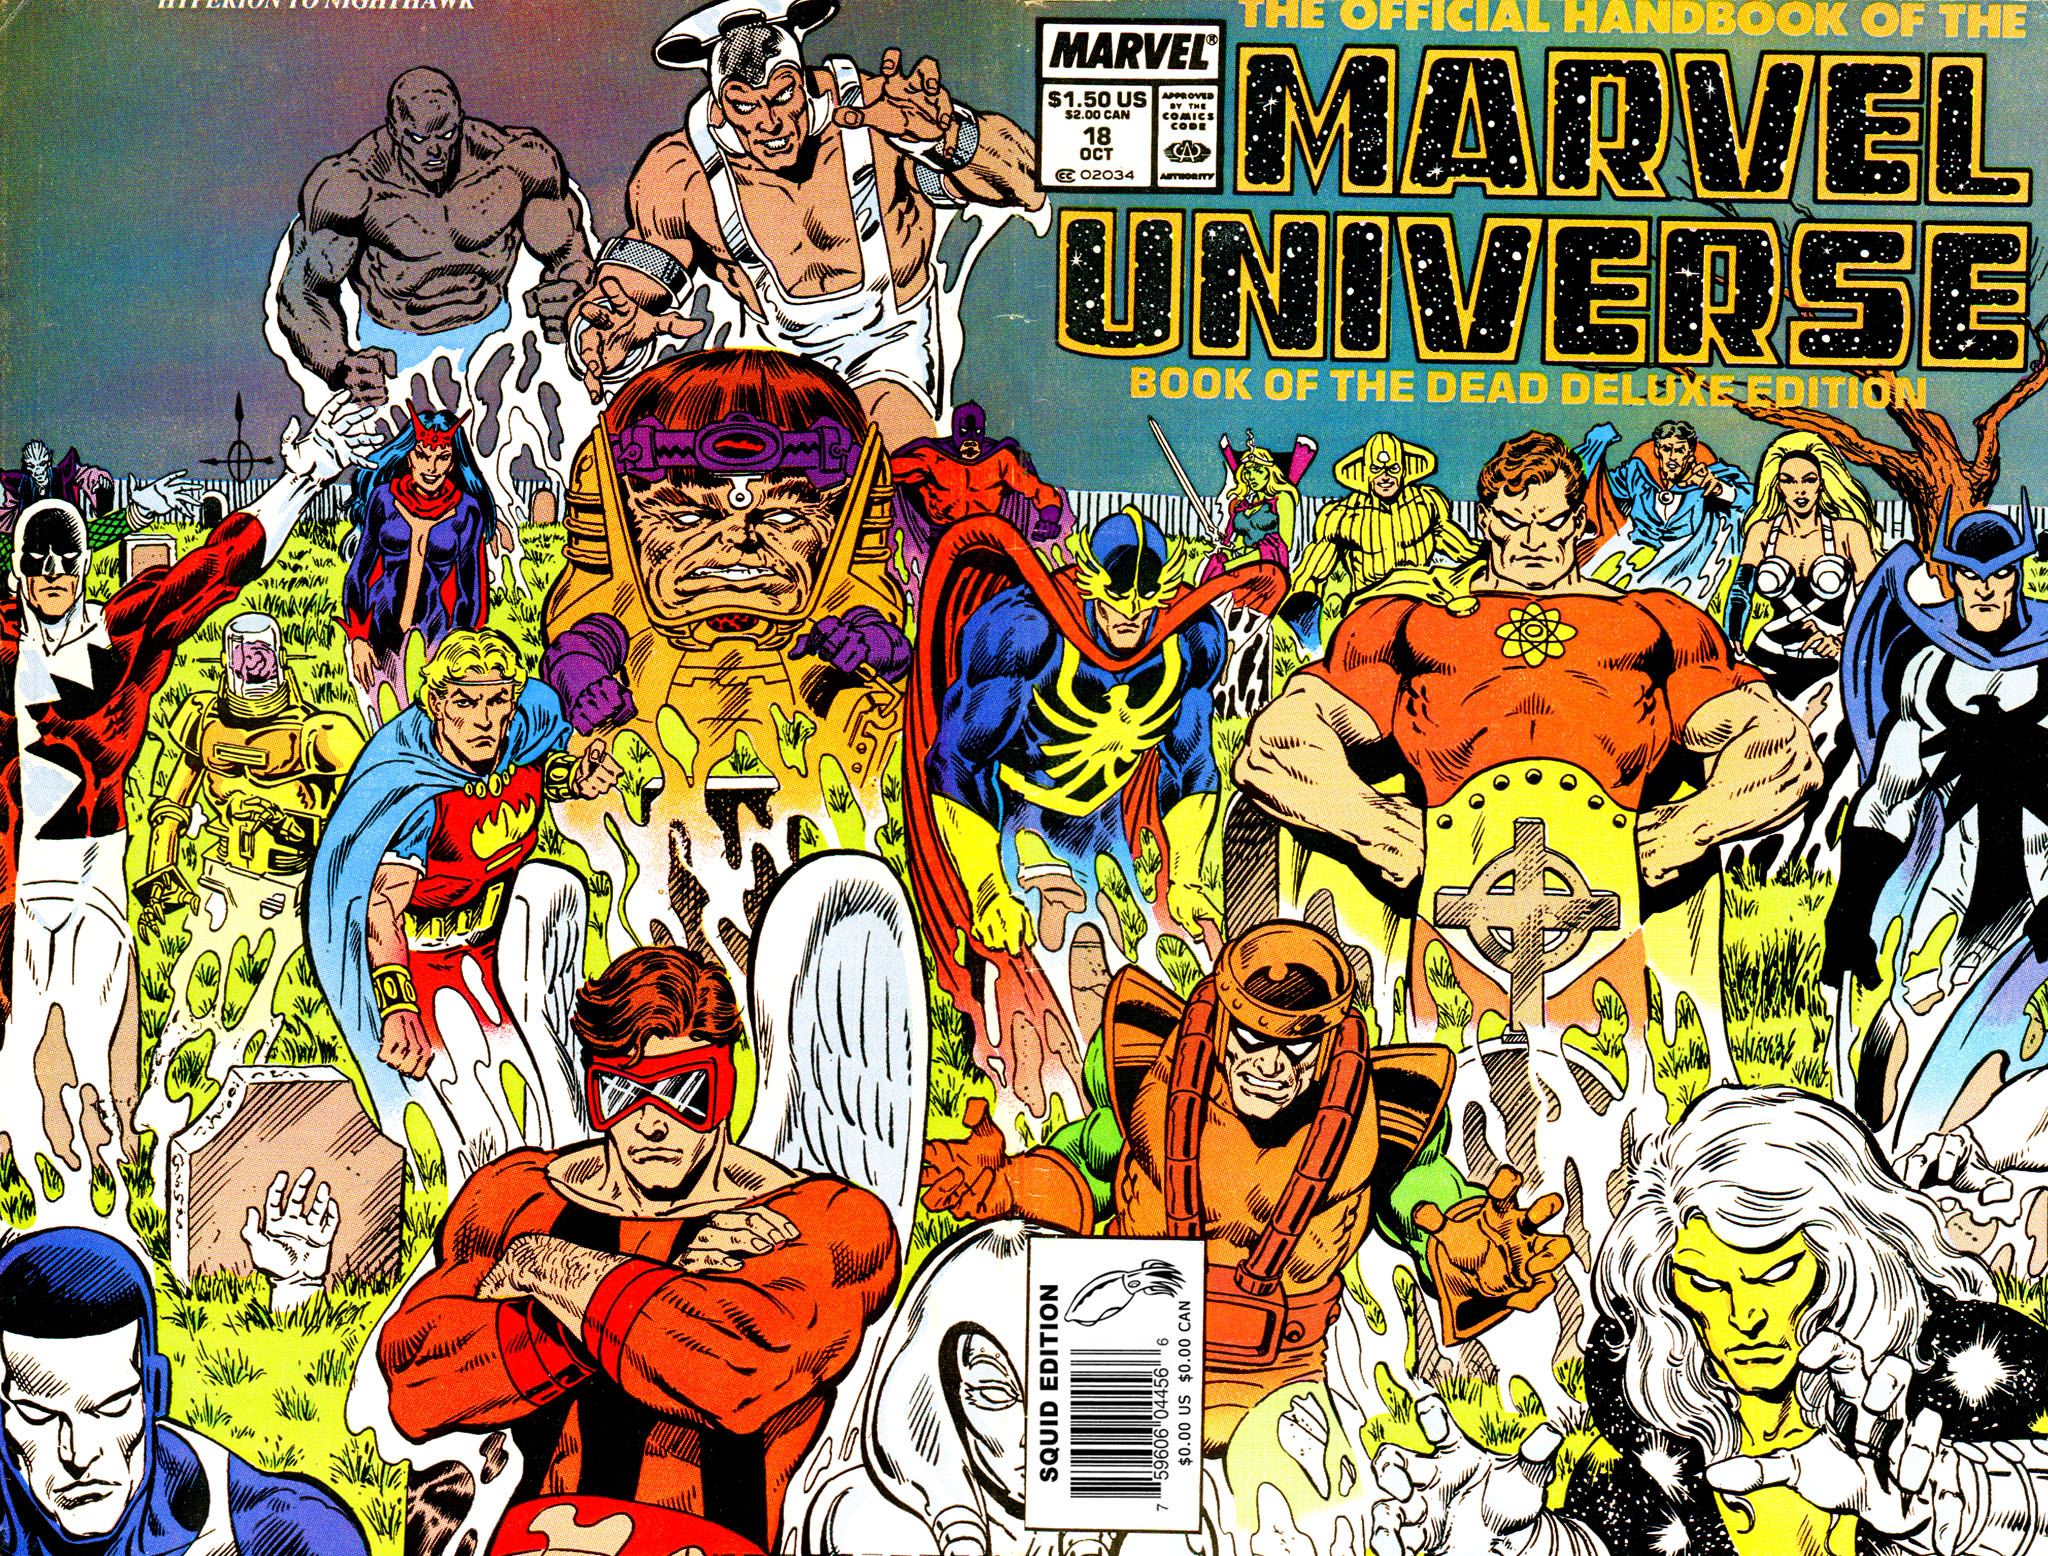 Read online The Official Handbook of the Marvel Universe Deluxe Edition comic -  Issue #18 - 1